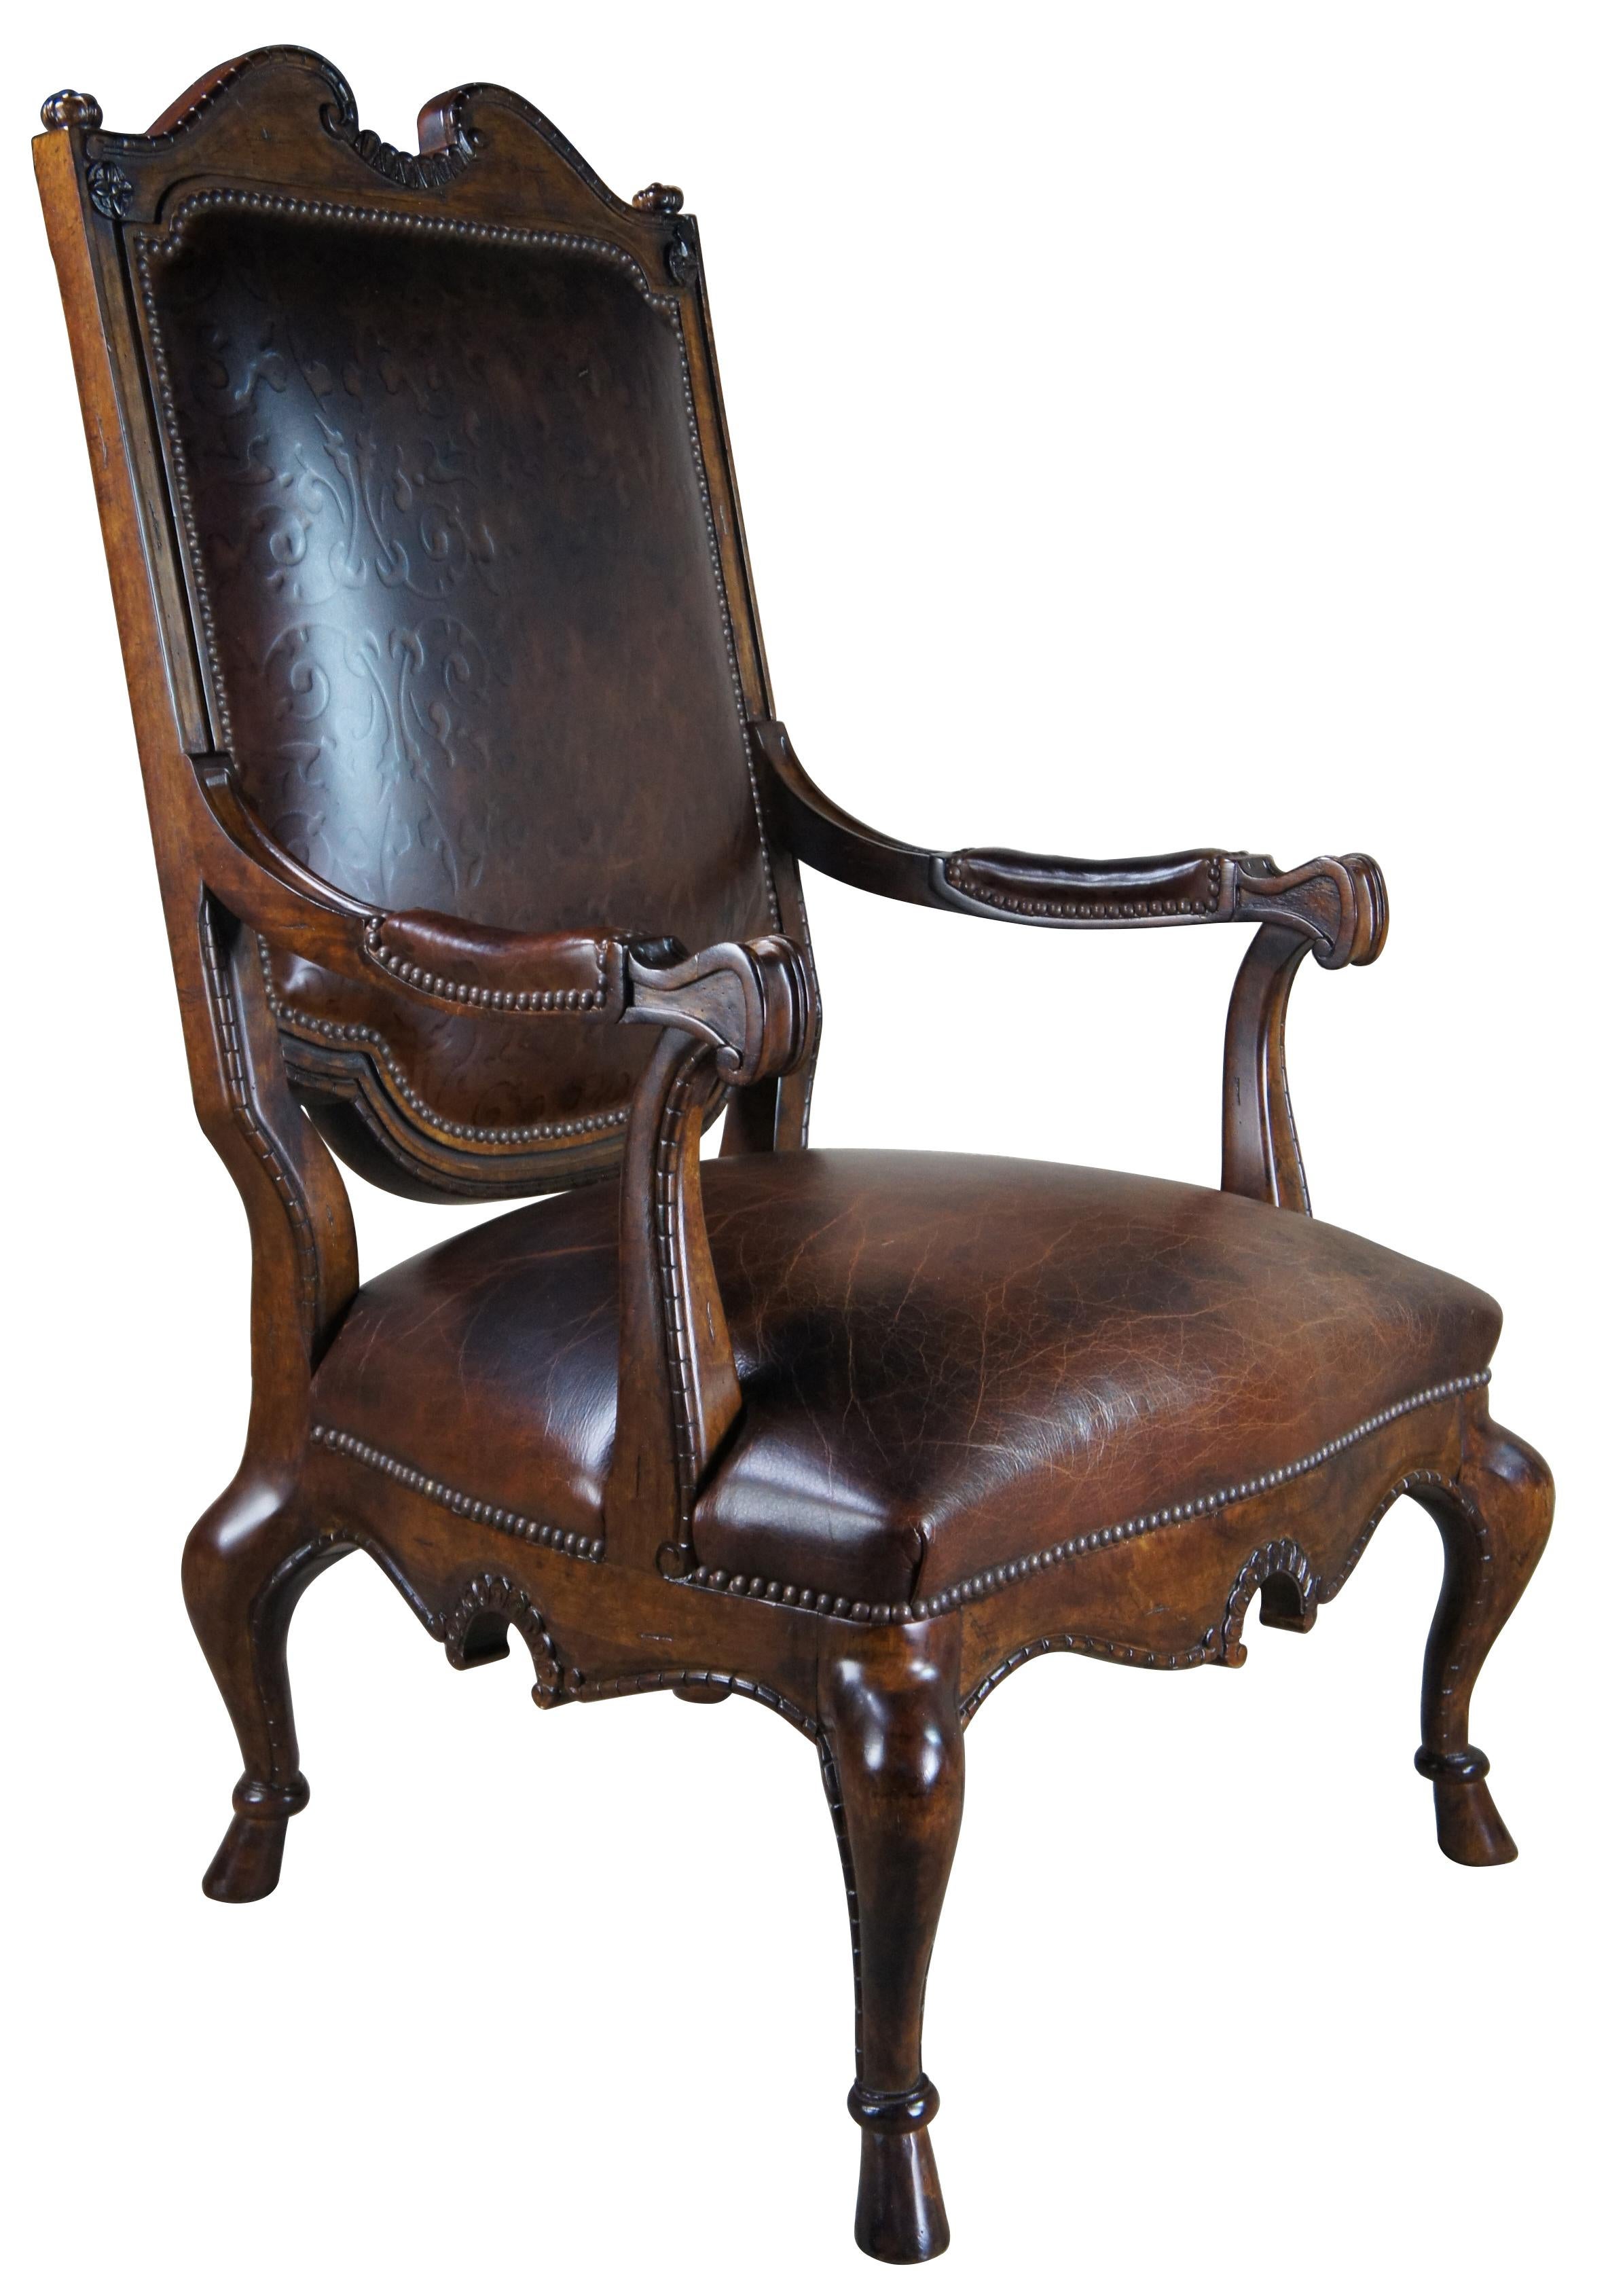 Century Furniture carved occasional armchair, circa 1990s Inspired by French Country styling with a high back and oversized form. Made from walnut with tooled brown leather, nailhead trim, cabrioe legs and hooved / hoof feat. The highback includes